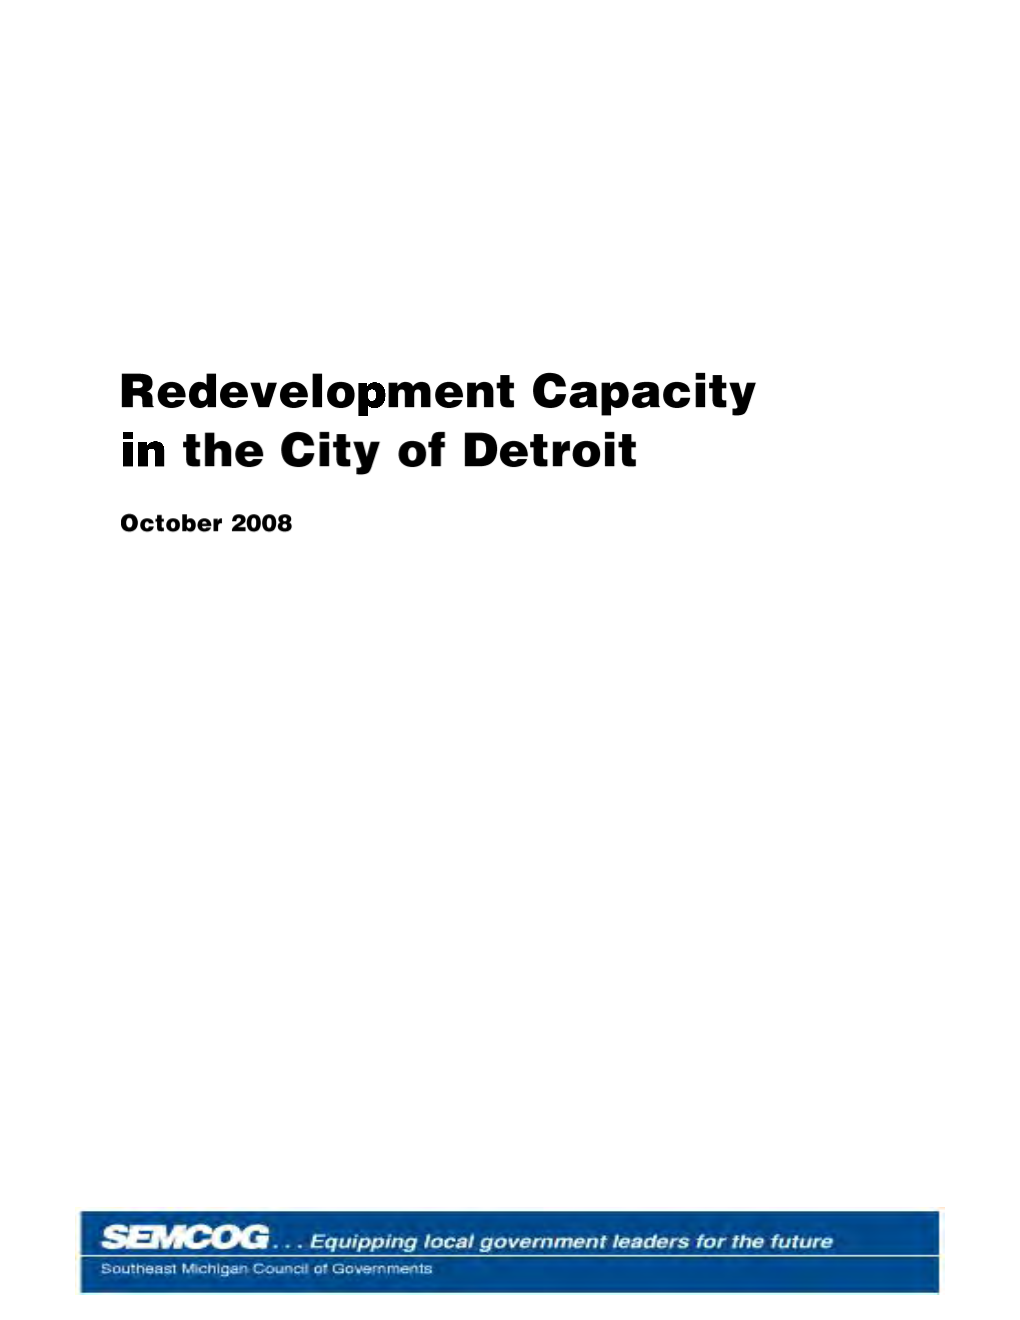 Redevelopment Capacity in the City of Detroit Provides Detail on the Demographic and Socio-Economic Impacts of Redevelopment